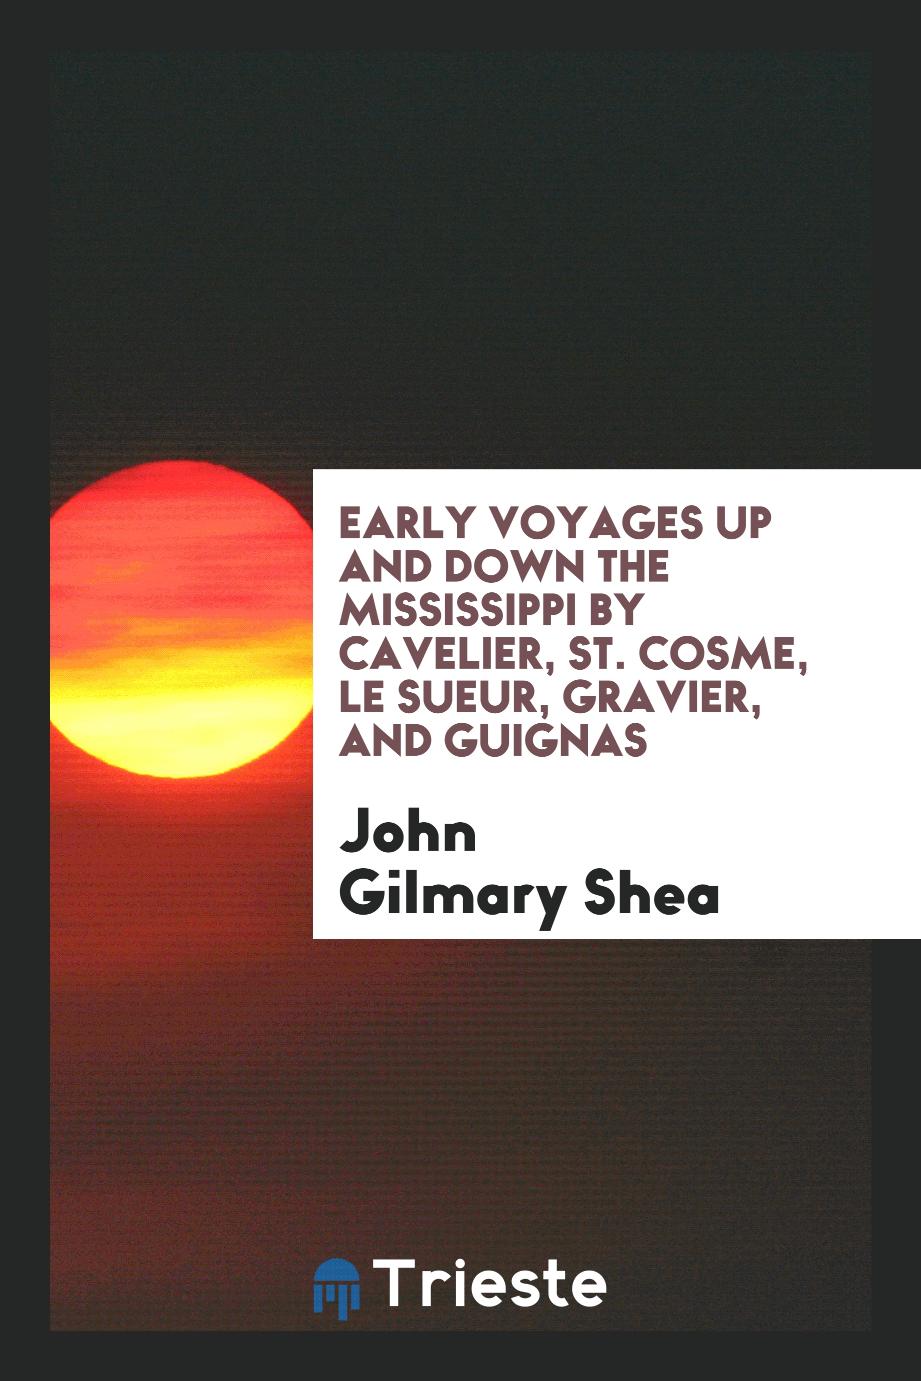 Early Voyages up and down the Mississippi by Cavelier, St. Cosme, Le Sueur, Gravier, and Guignas